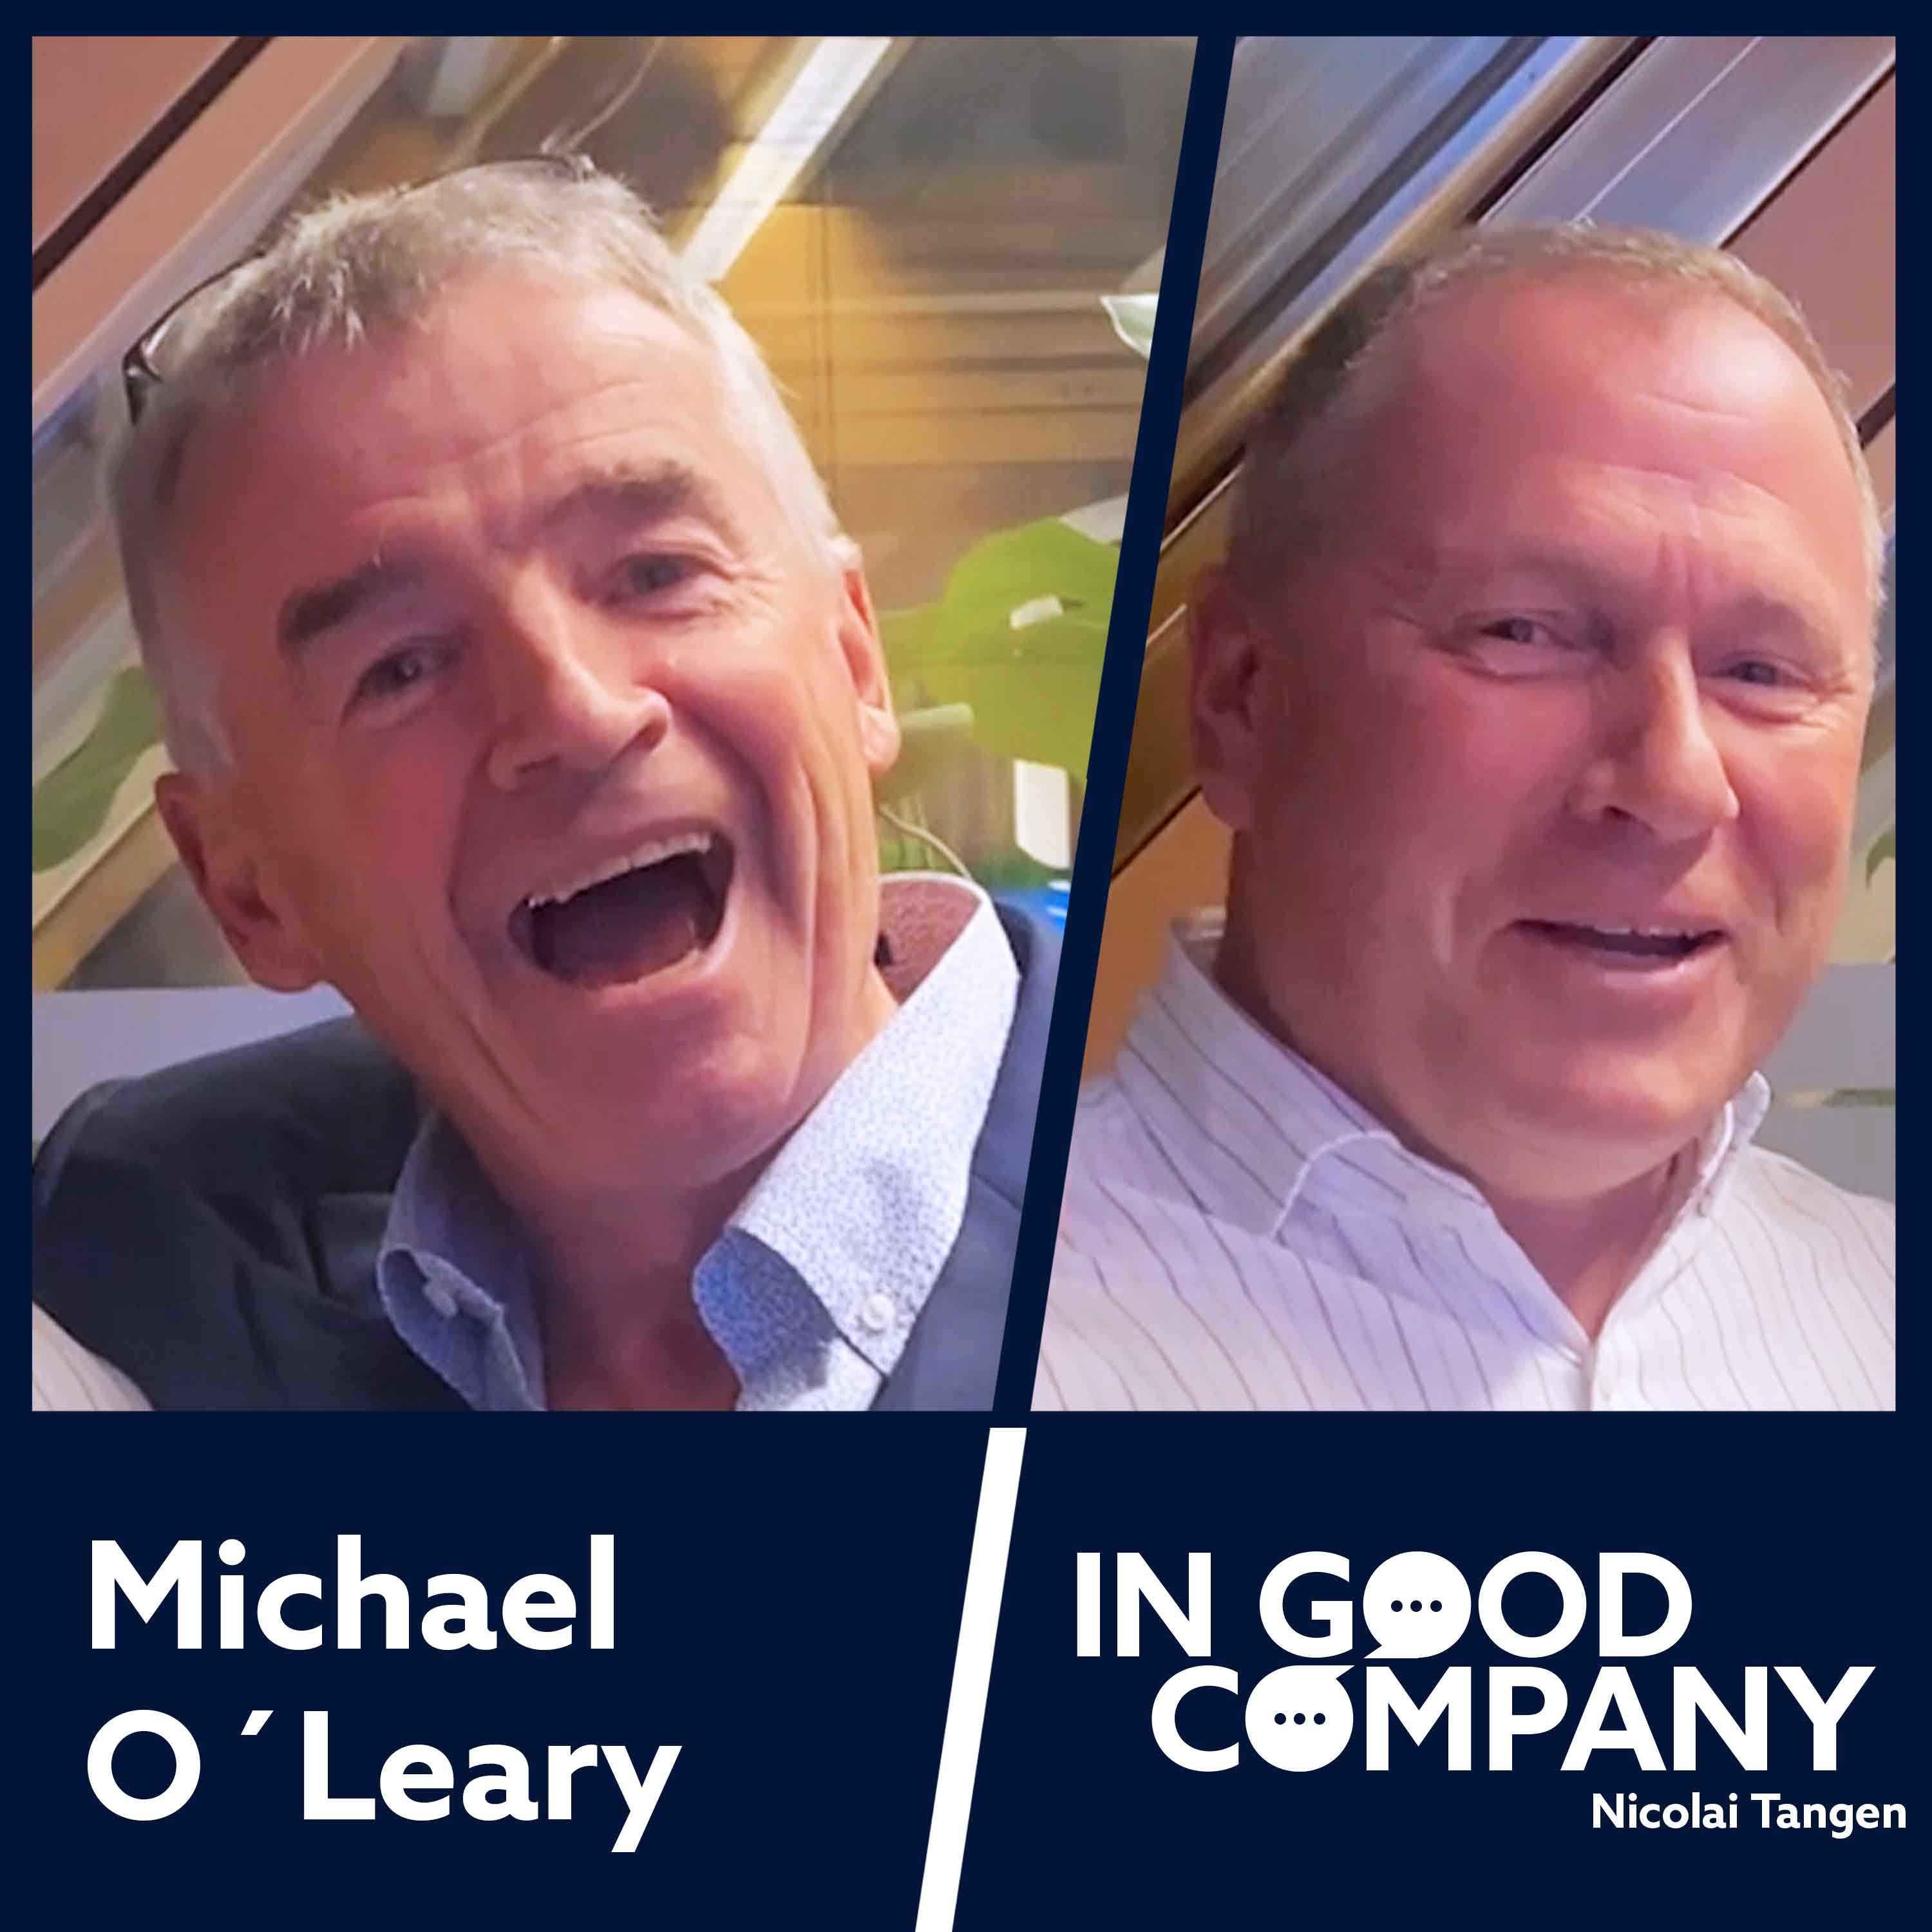 Michael O’Leary CEO of Ryanair by Norges Bank Investment Management